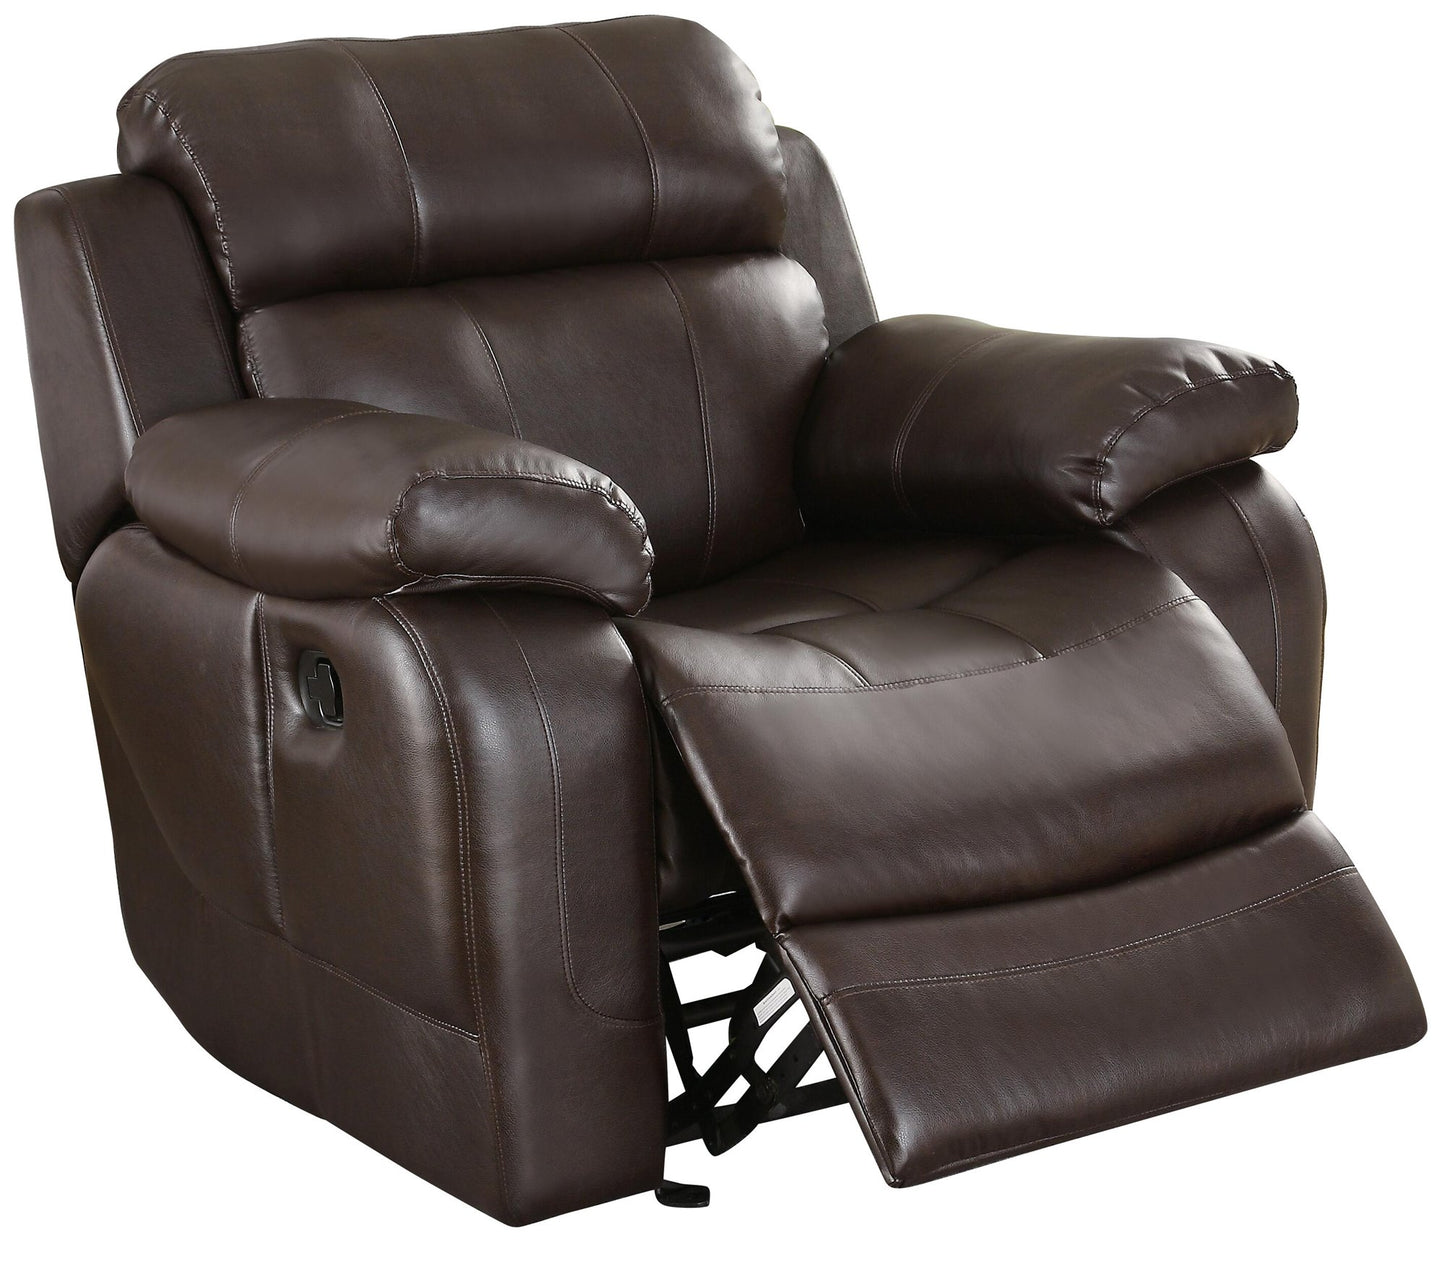 Homelegance Marille2PC Set Double Glider Reclining Love Seat with Console & Glider Recliner Chair in Leather - Dark Brown